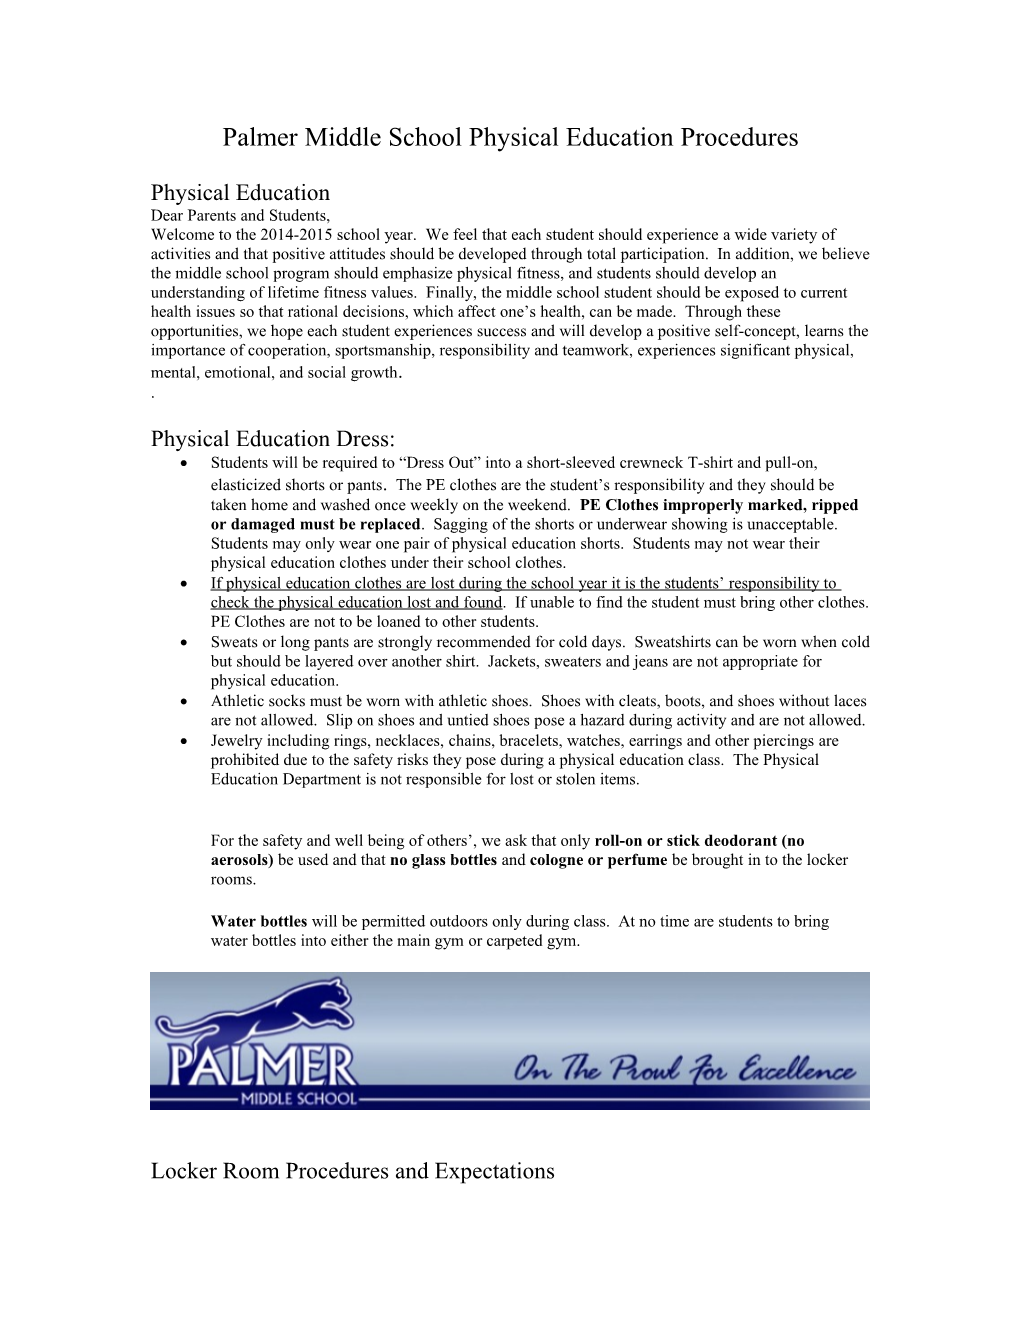 Palmer Middle School Physical Education Letter